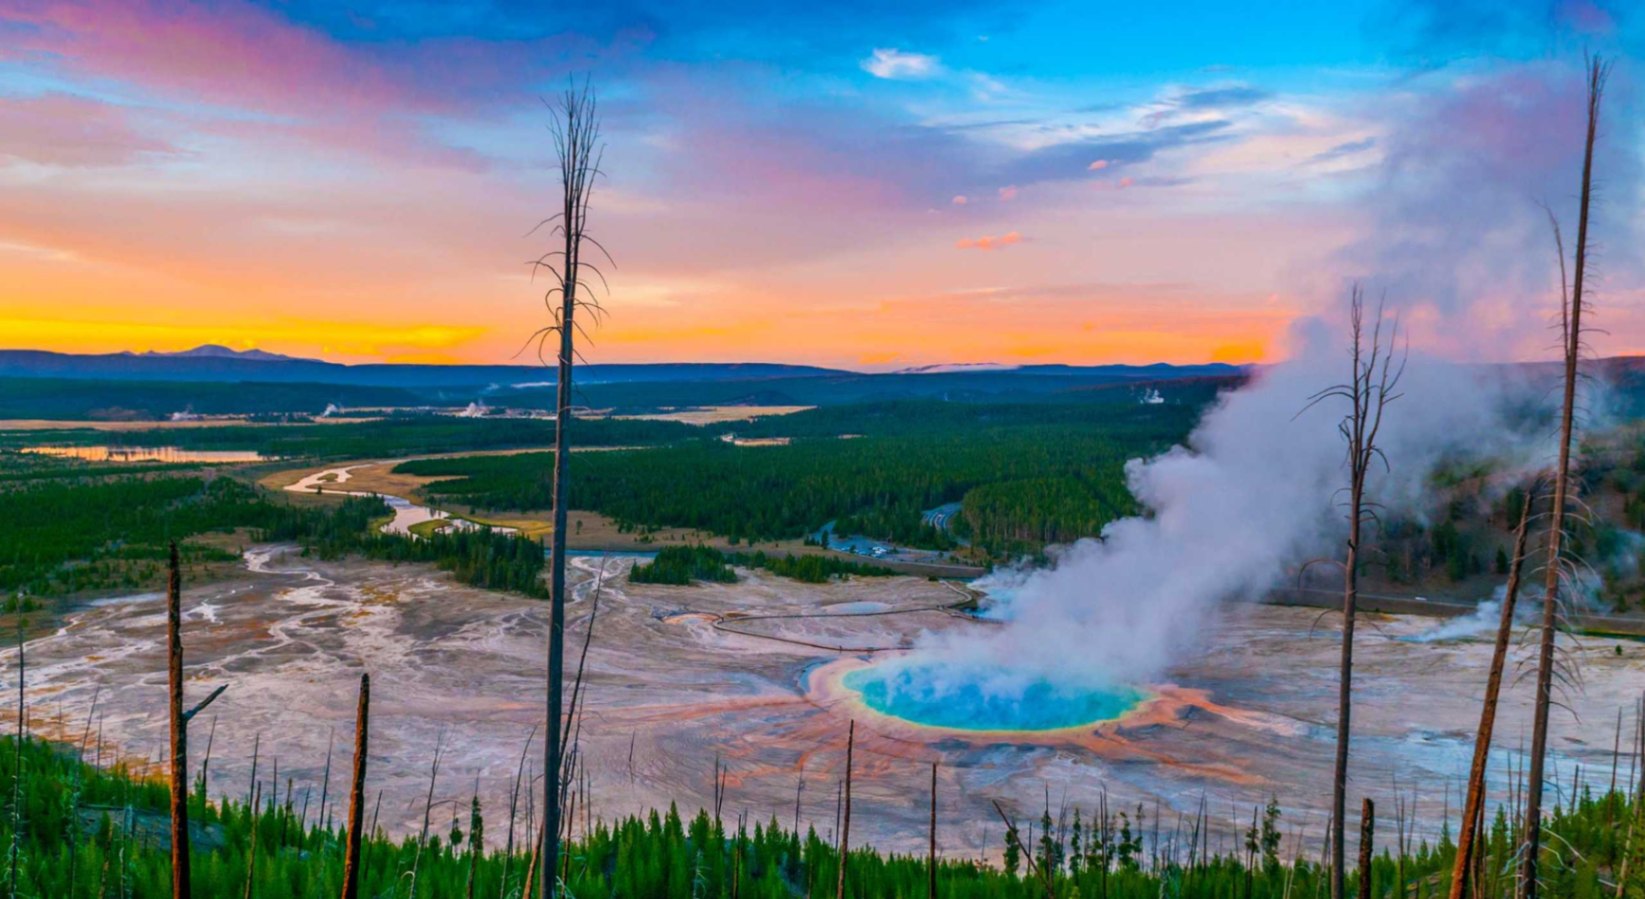 The 15 Most Underrated States to Travel to in the US